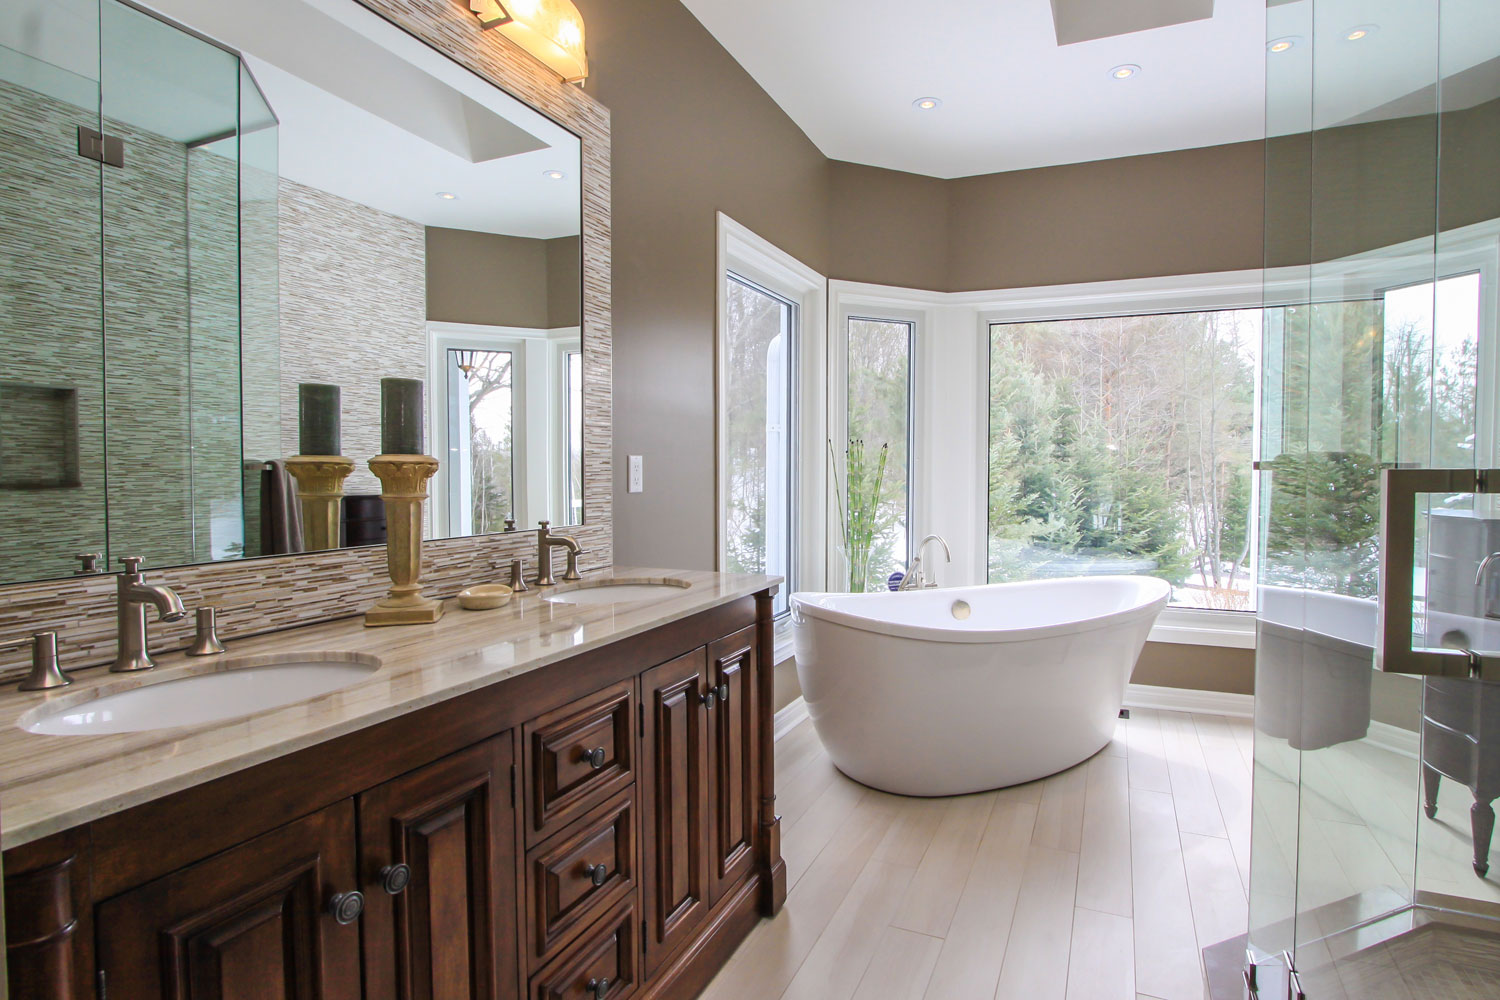 Traditional large ensuite design with dual vanities, floating soaker tub, glass shower - Total Living Concepts barrie ontario